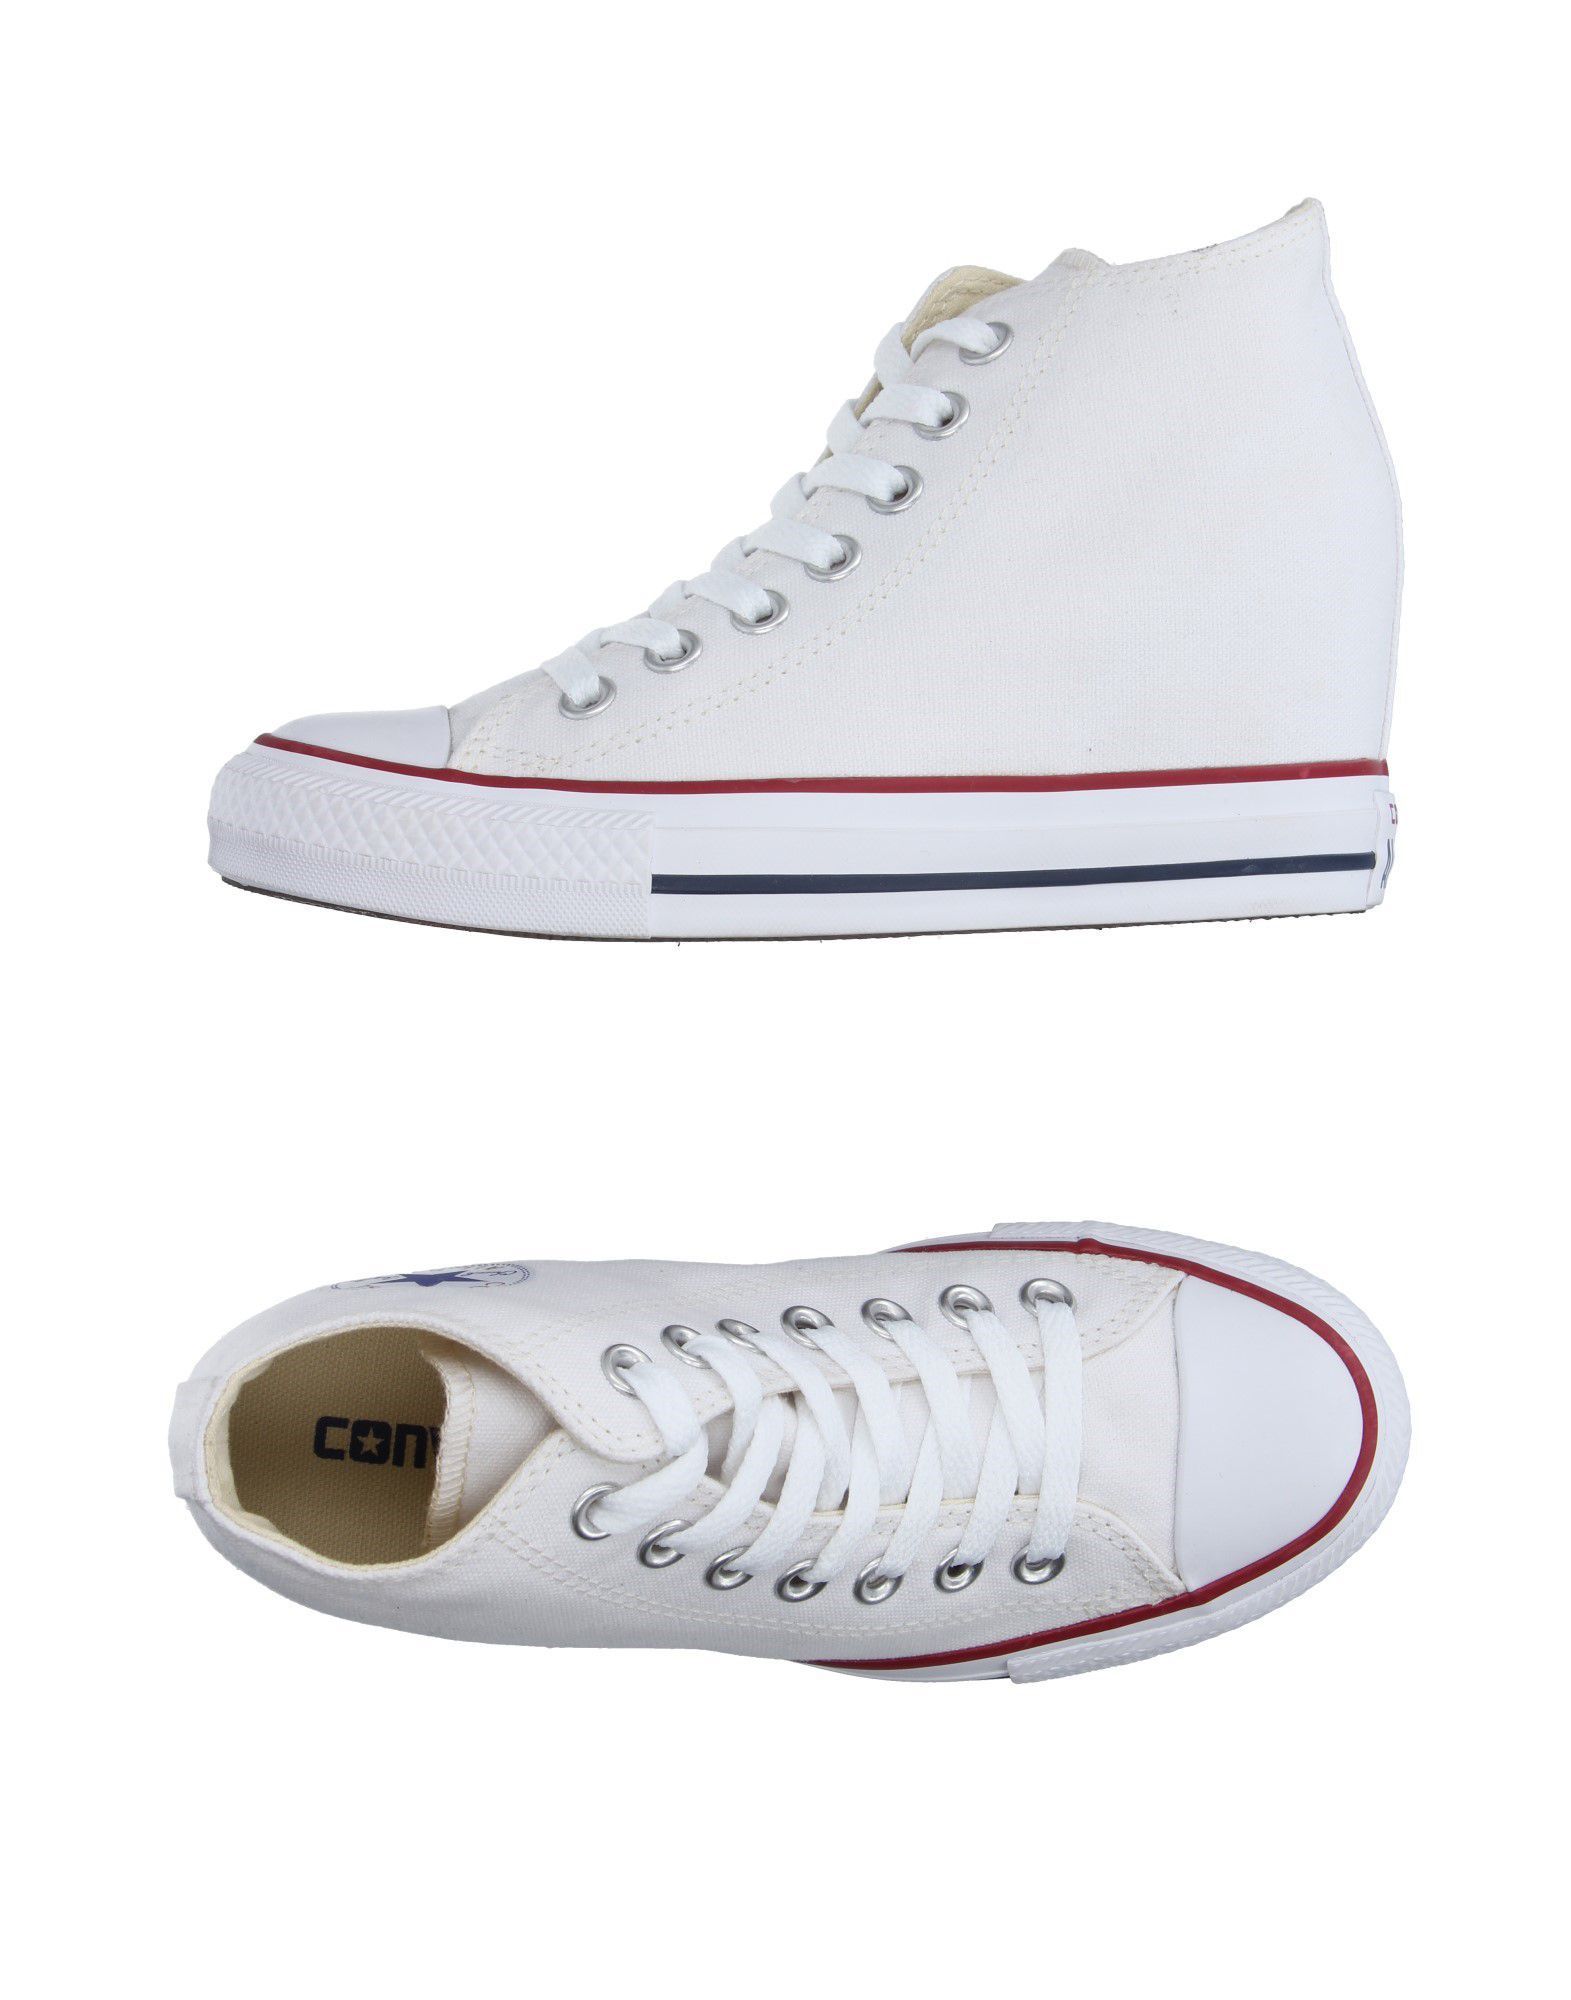 CONVERSE ALL STAR Sneakers | YOOX (US)